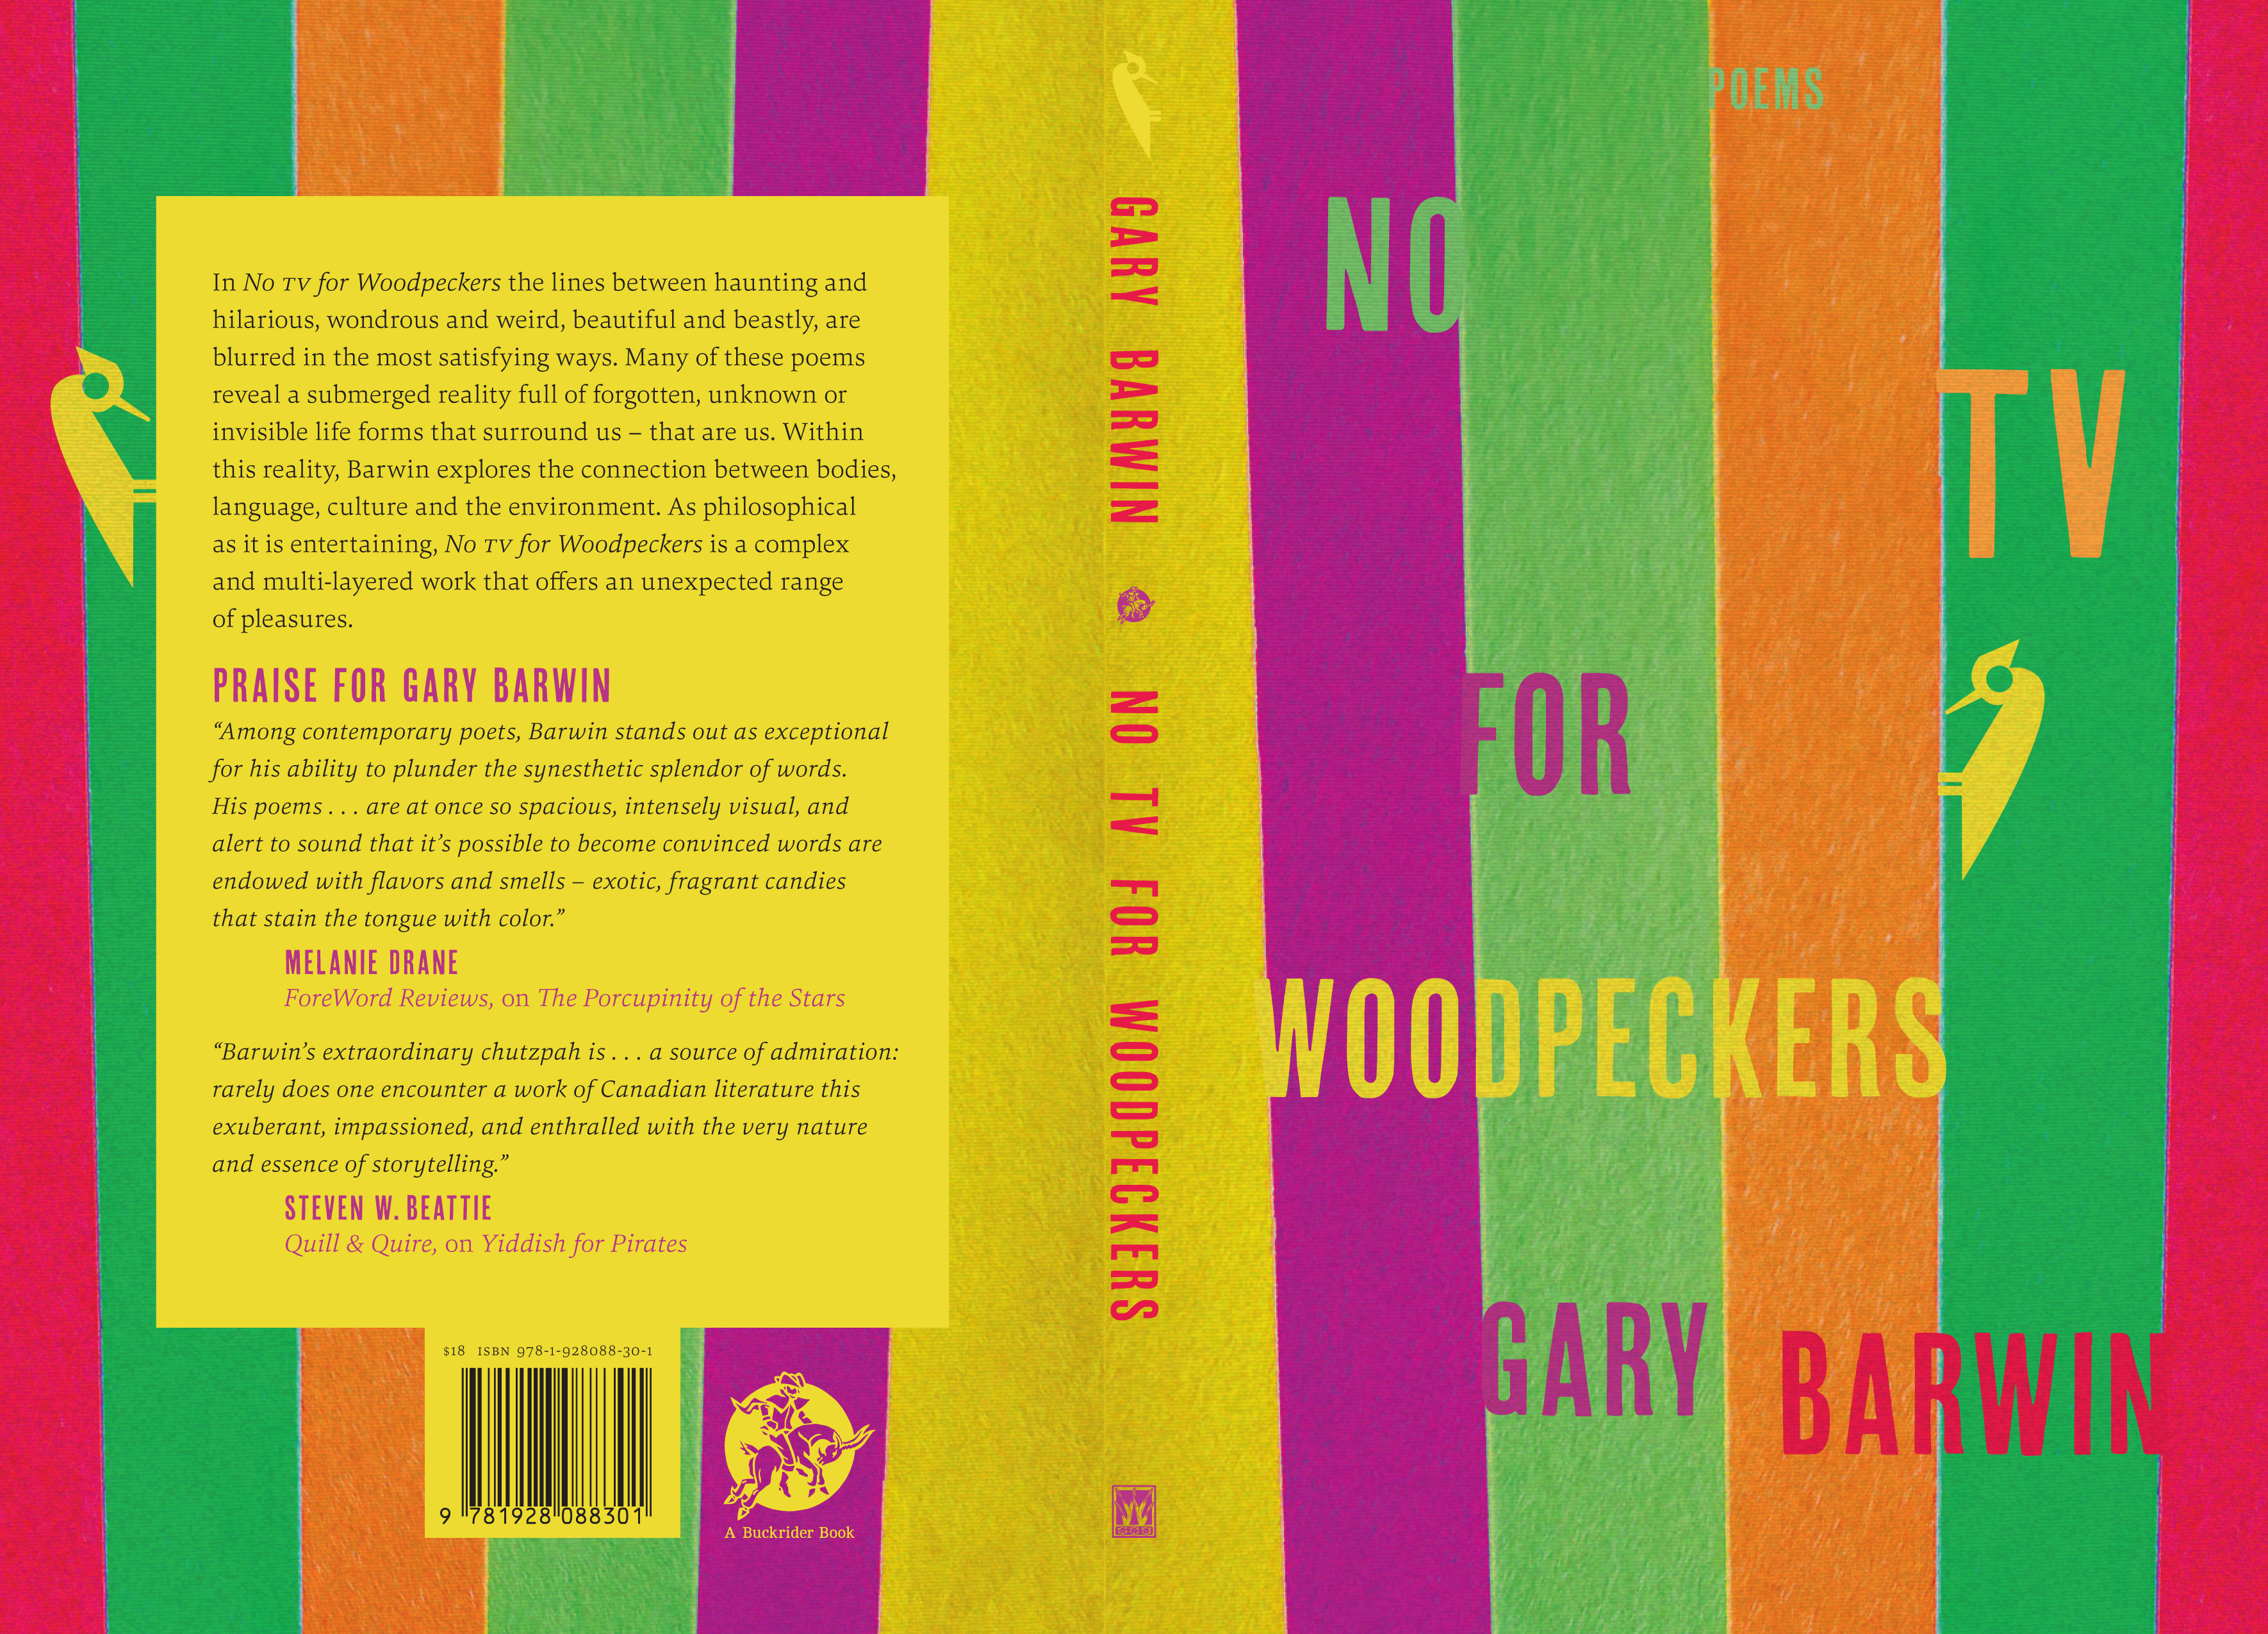 No TV for Woodpeckers Jacket 2